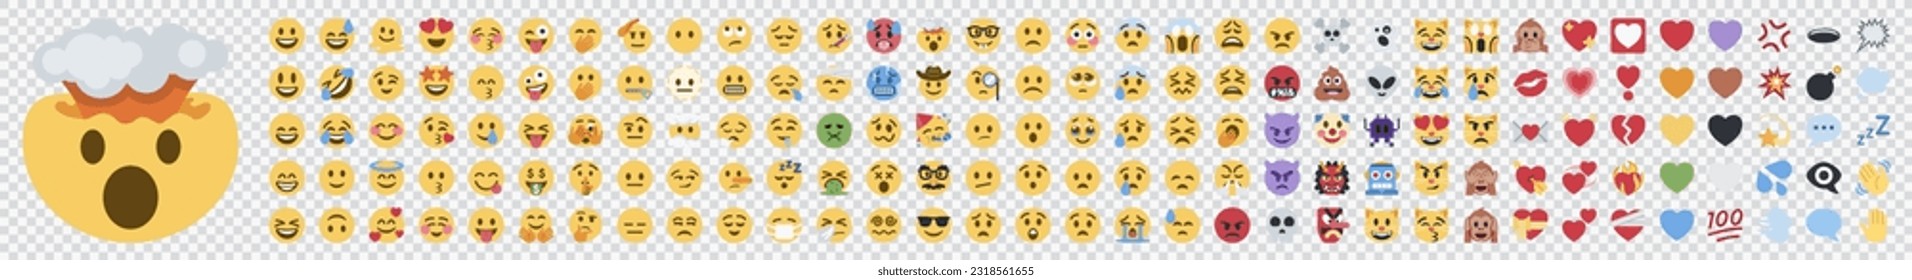 Big set of iOS emoji. Funny emoticons faces with facial expressions. Full editable vector icons. iOS emoji. Detailed emoji icon from the WhatsApp, Facebook, twitter. On transparent background. svg